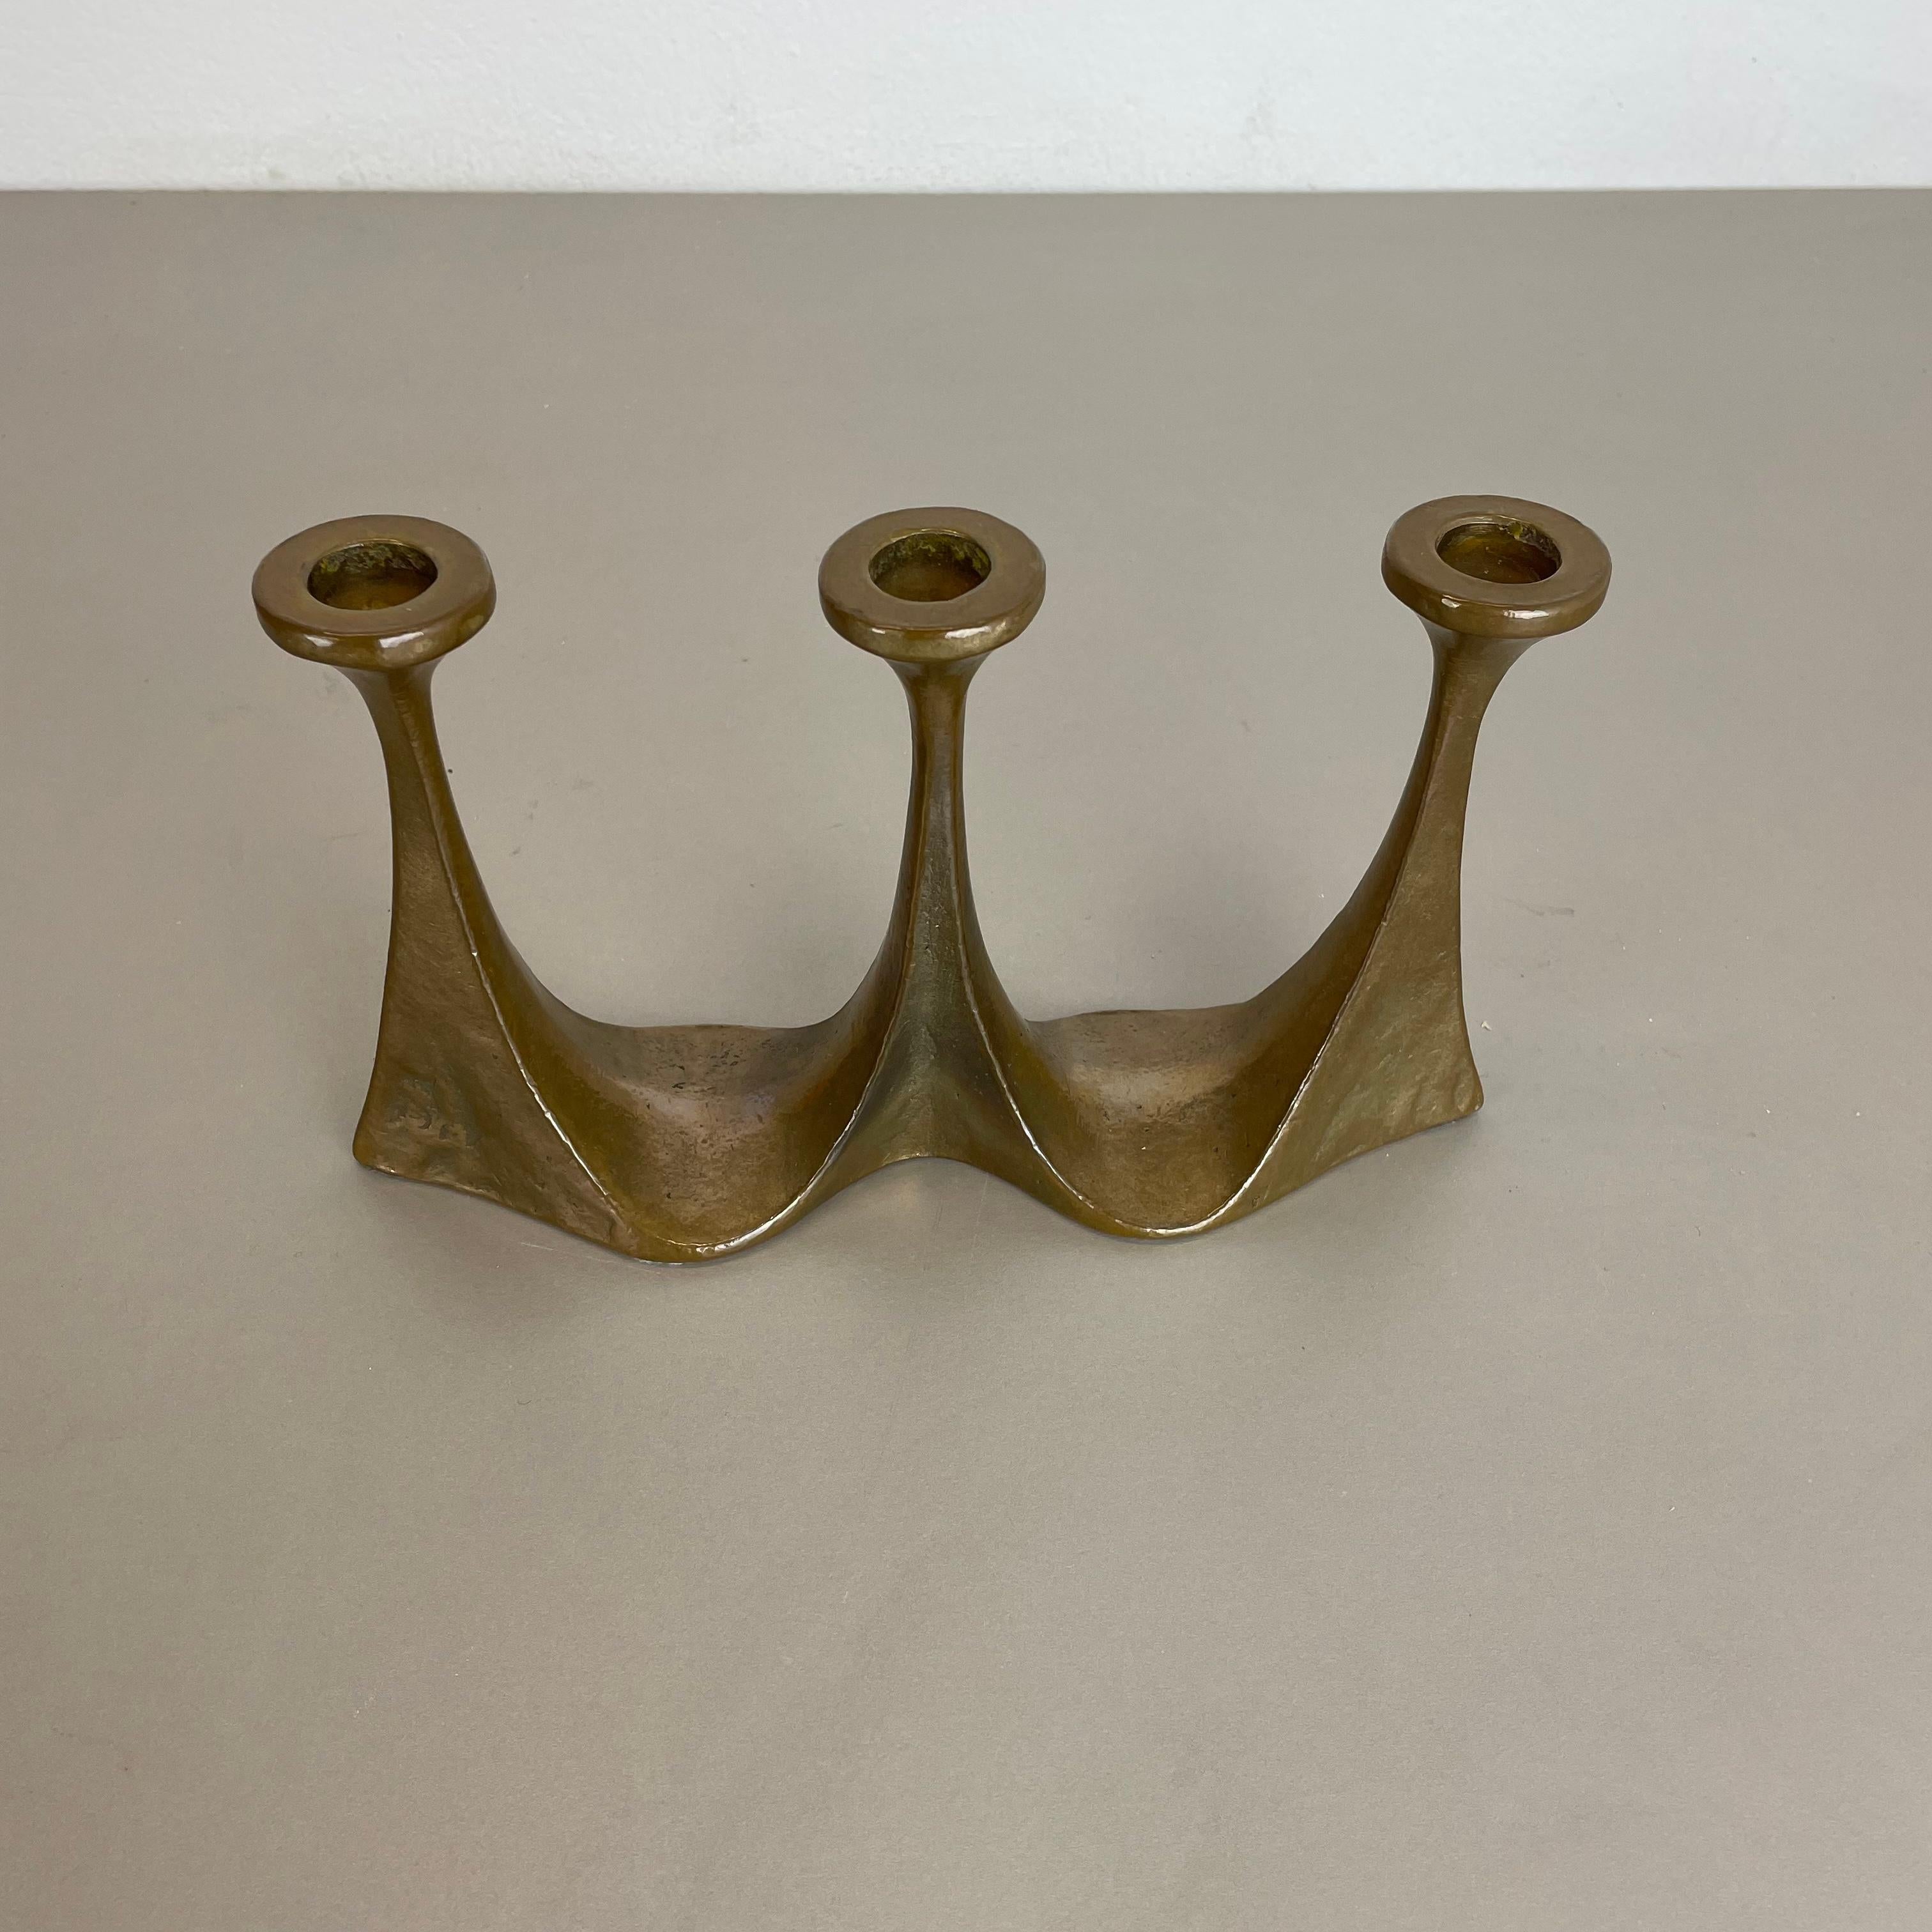 Article: Brutalist candleholder

Origin: Germany

Design producer: Michael Harjes

Material: bronze

Decade: 1960s

Description: This original vintage candleholder was produced in the 1960s in Germany. Designed and executed by Michael